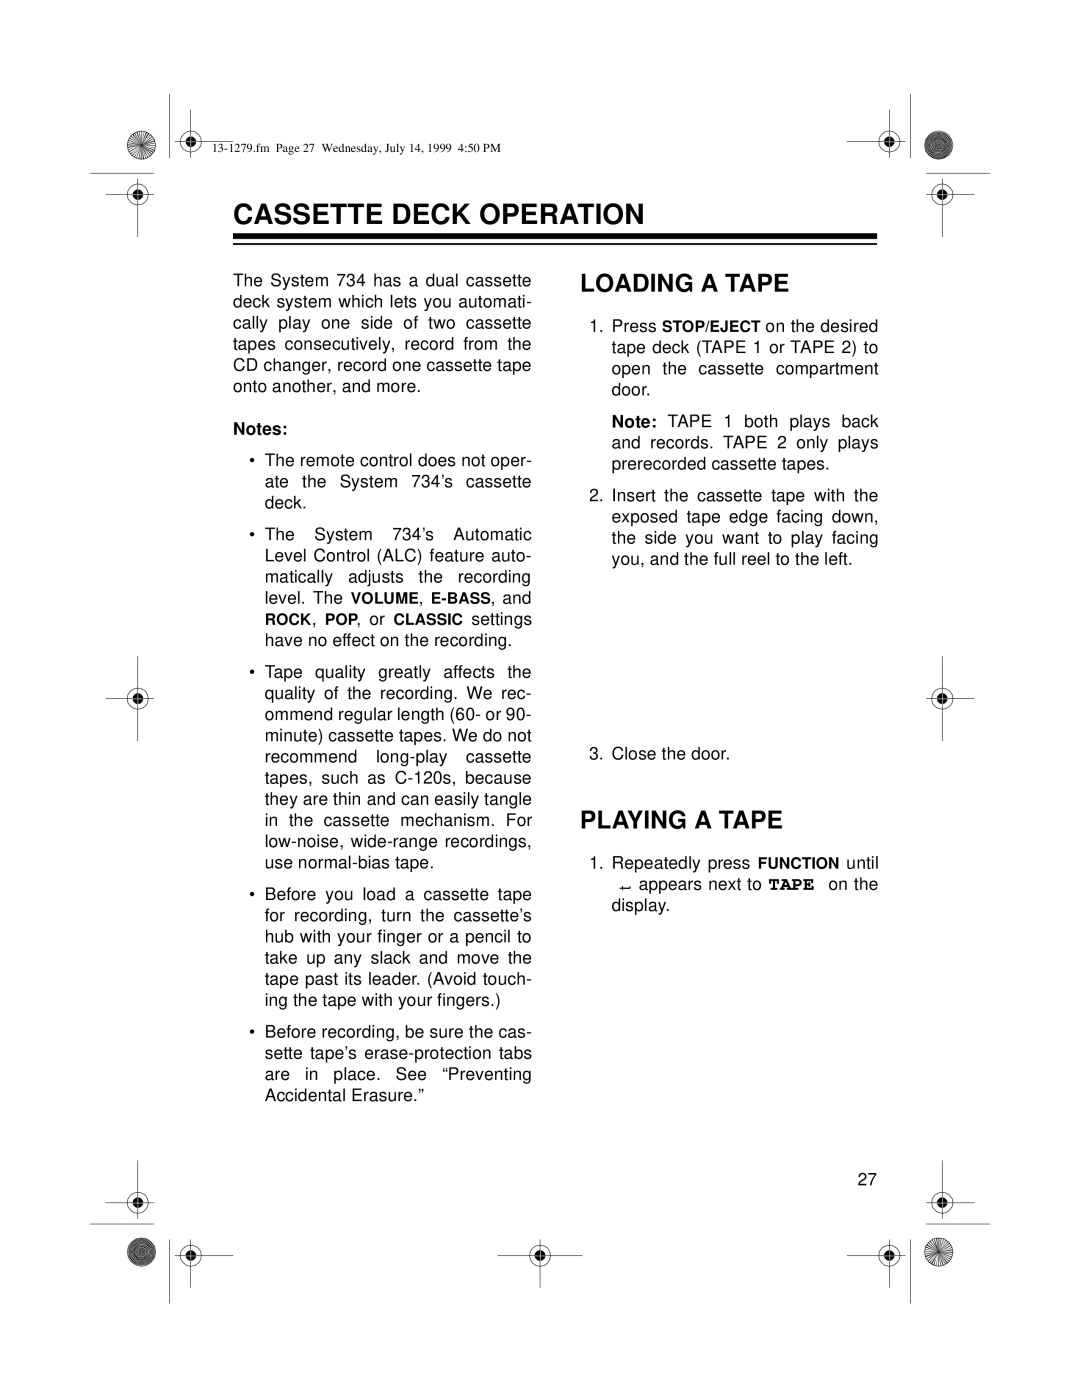 Optimus SYSTEM 734 owner manual Cassette Deck Operation, Loading A Tape, Playing A Tape 